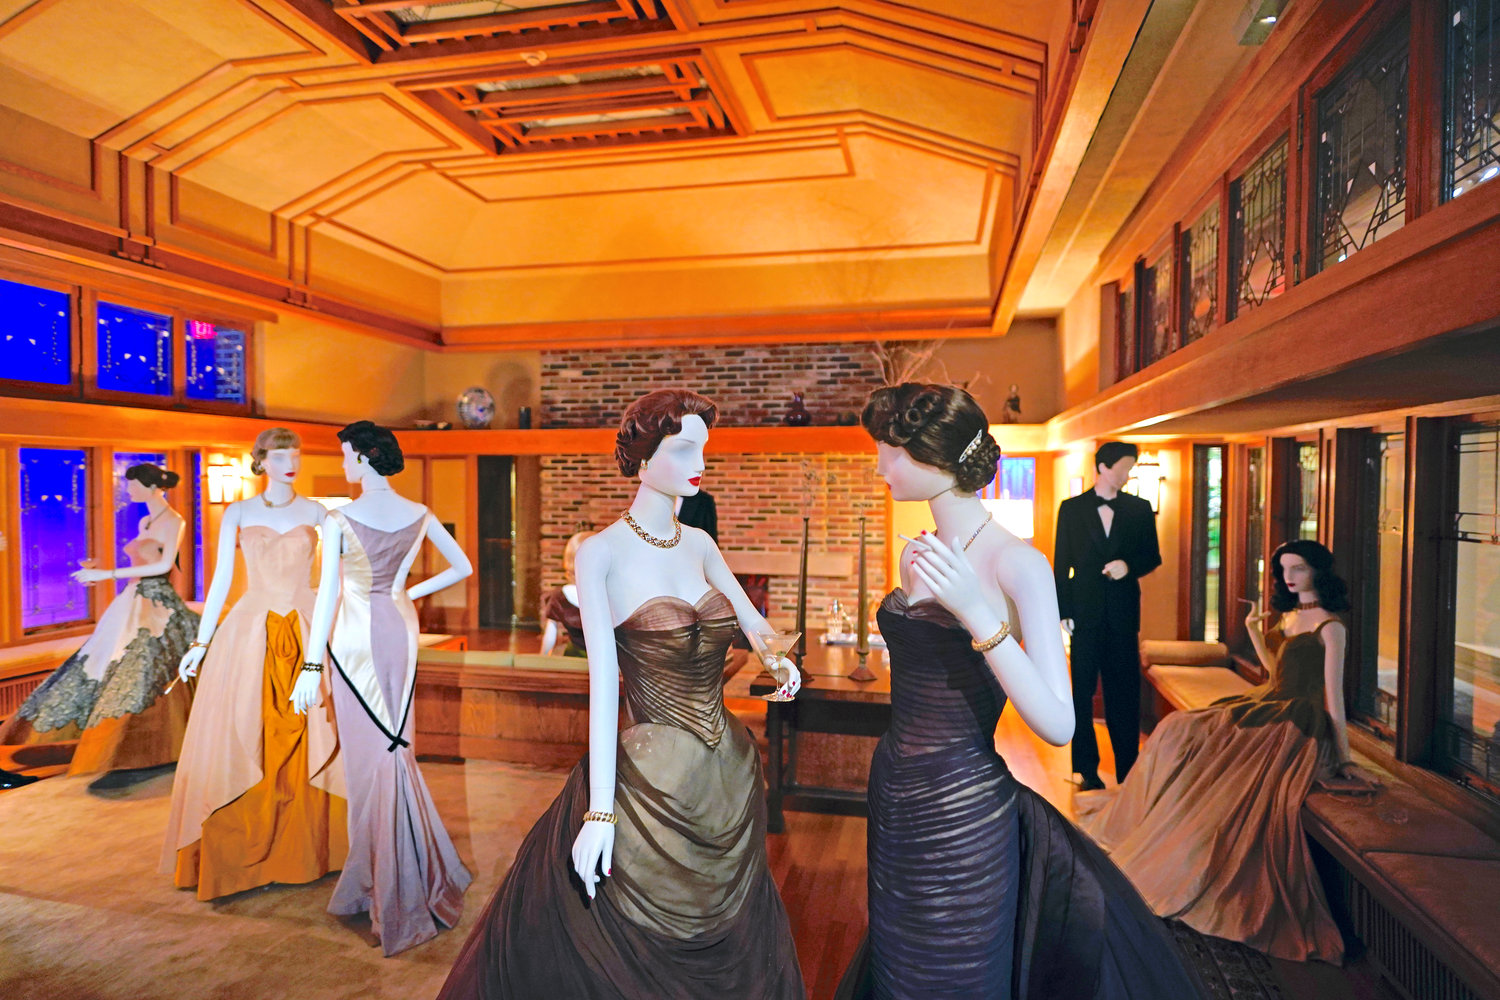 A scene staged by film director Martin Scorsese featuring fashions by designer Charles James and a room by architect Frank Lloyd Wright is displayed as part of the Met Museum Costume Institute’s exhibit “In America: A Lexicon of Fashion,” Saturday, April 30, in NYC.